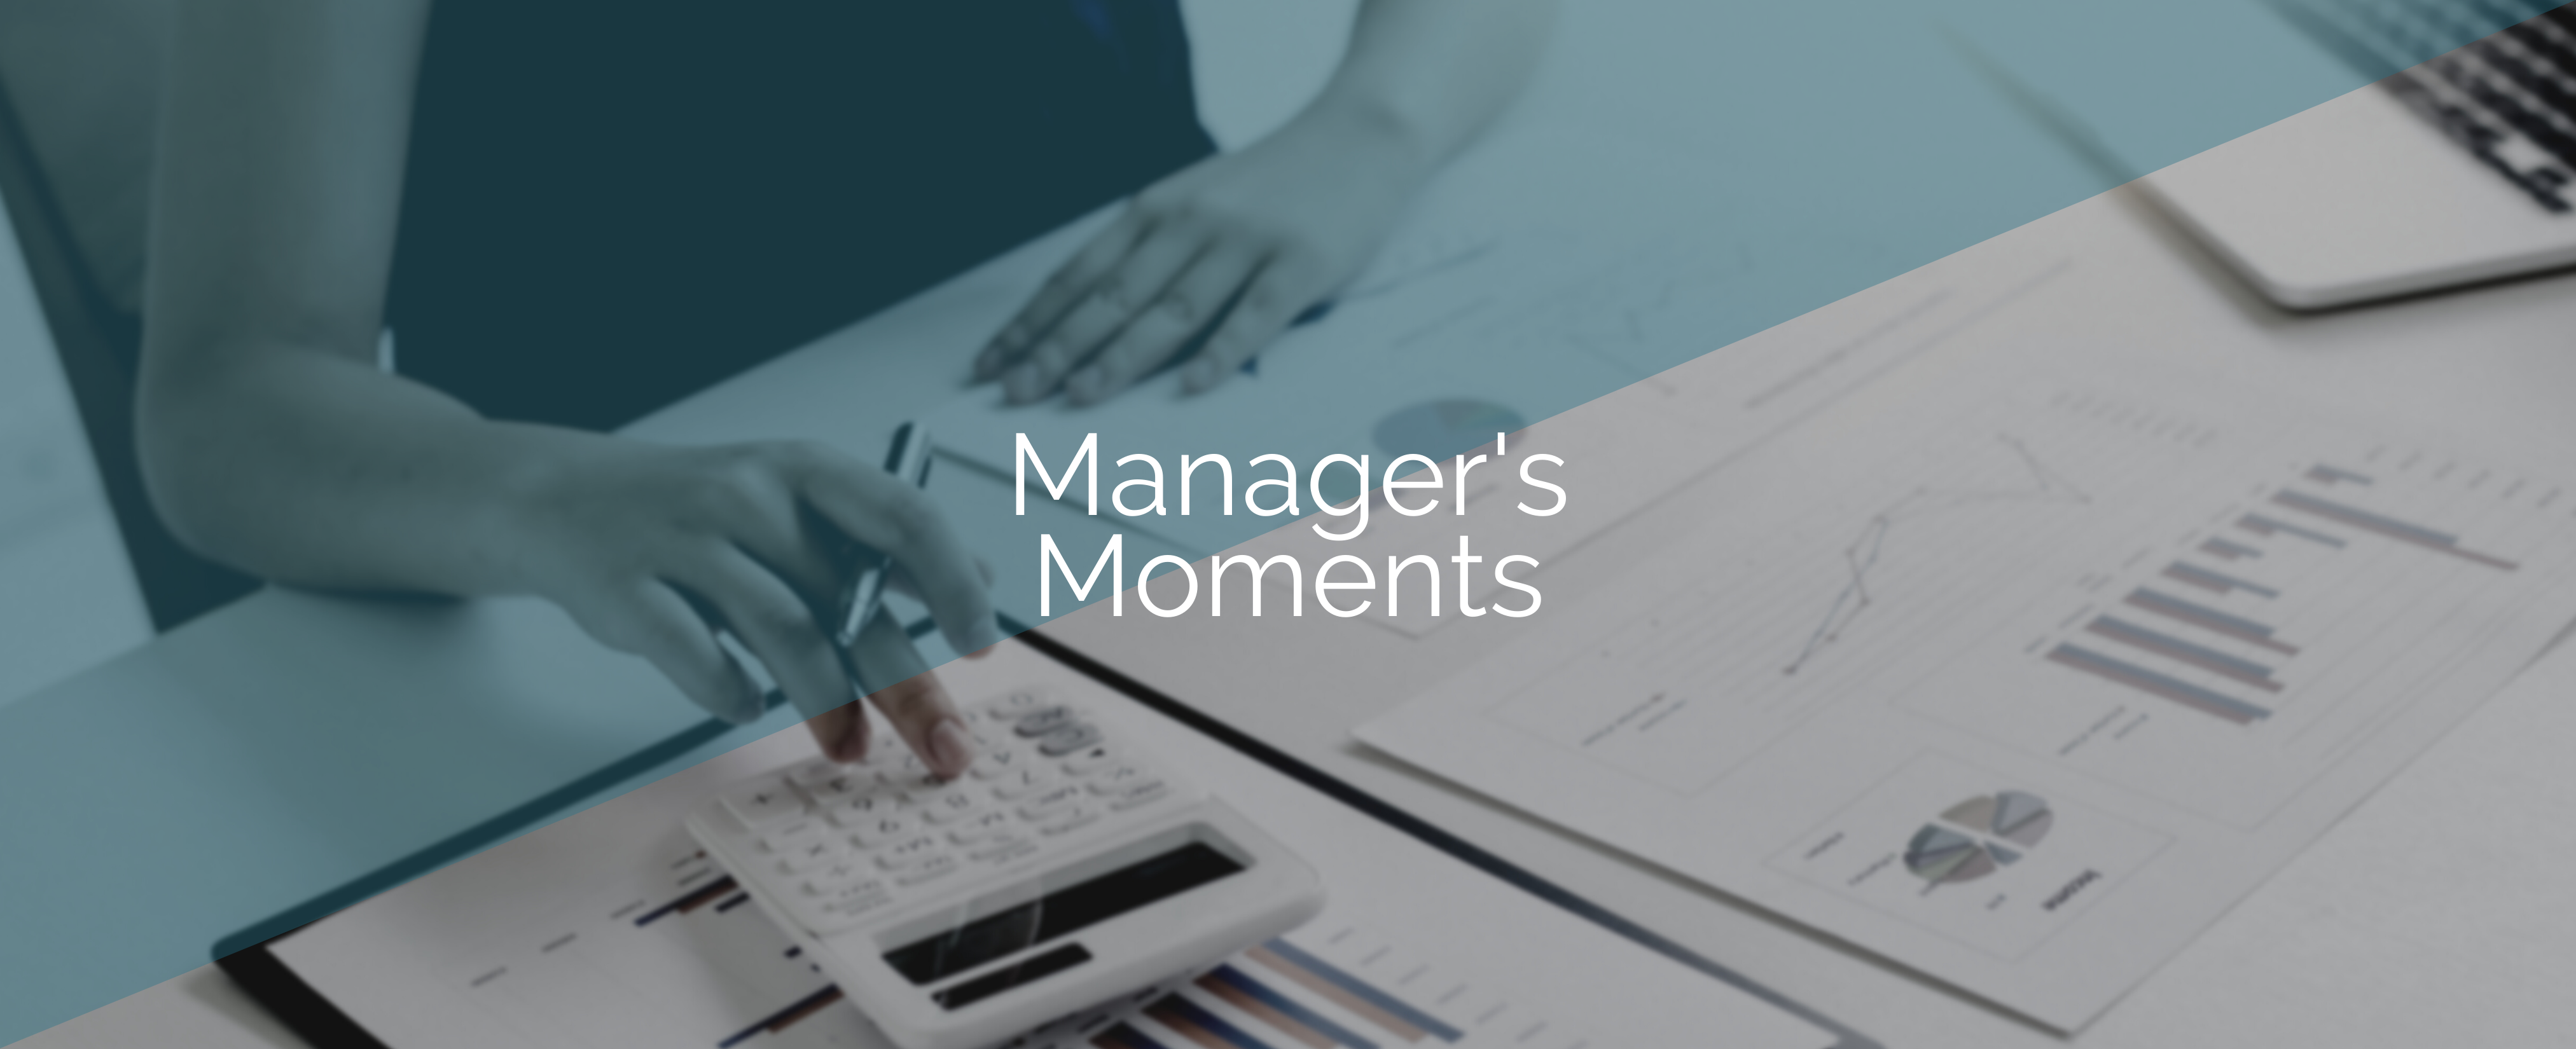 Manager's Moments Header No Text